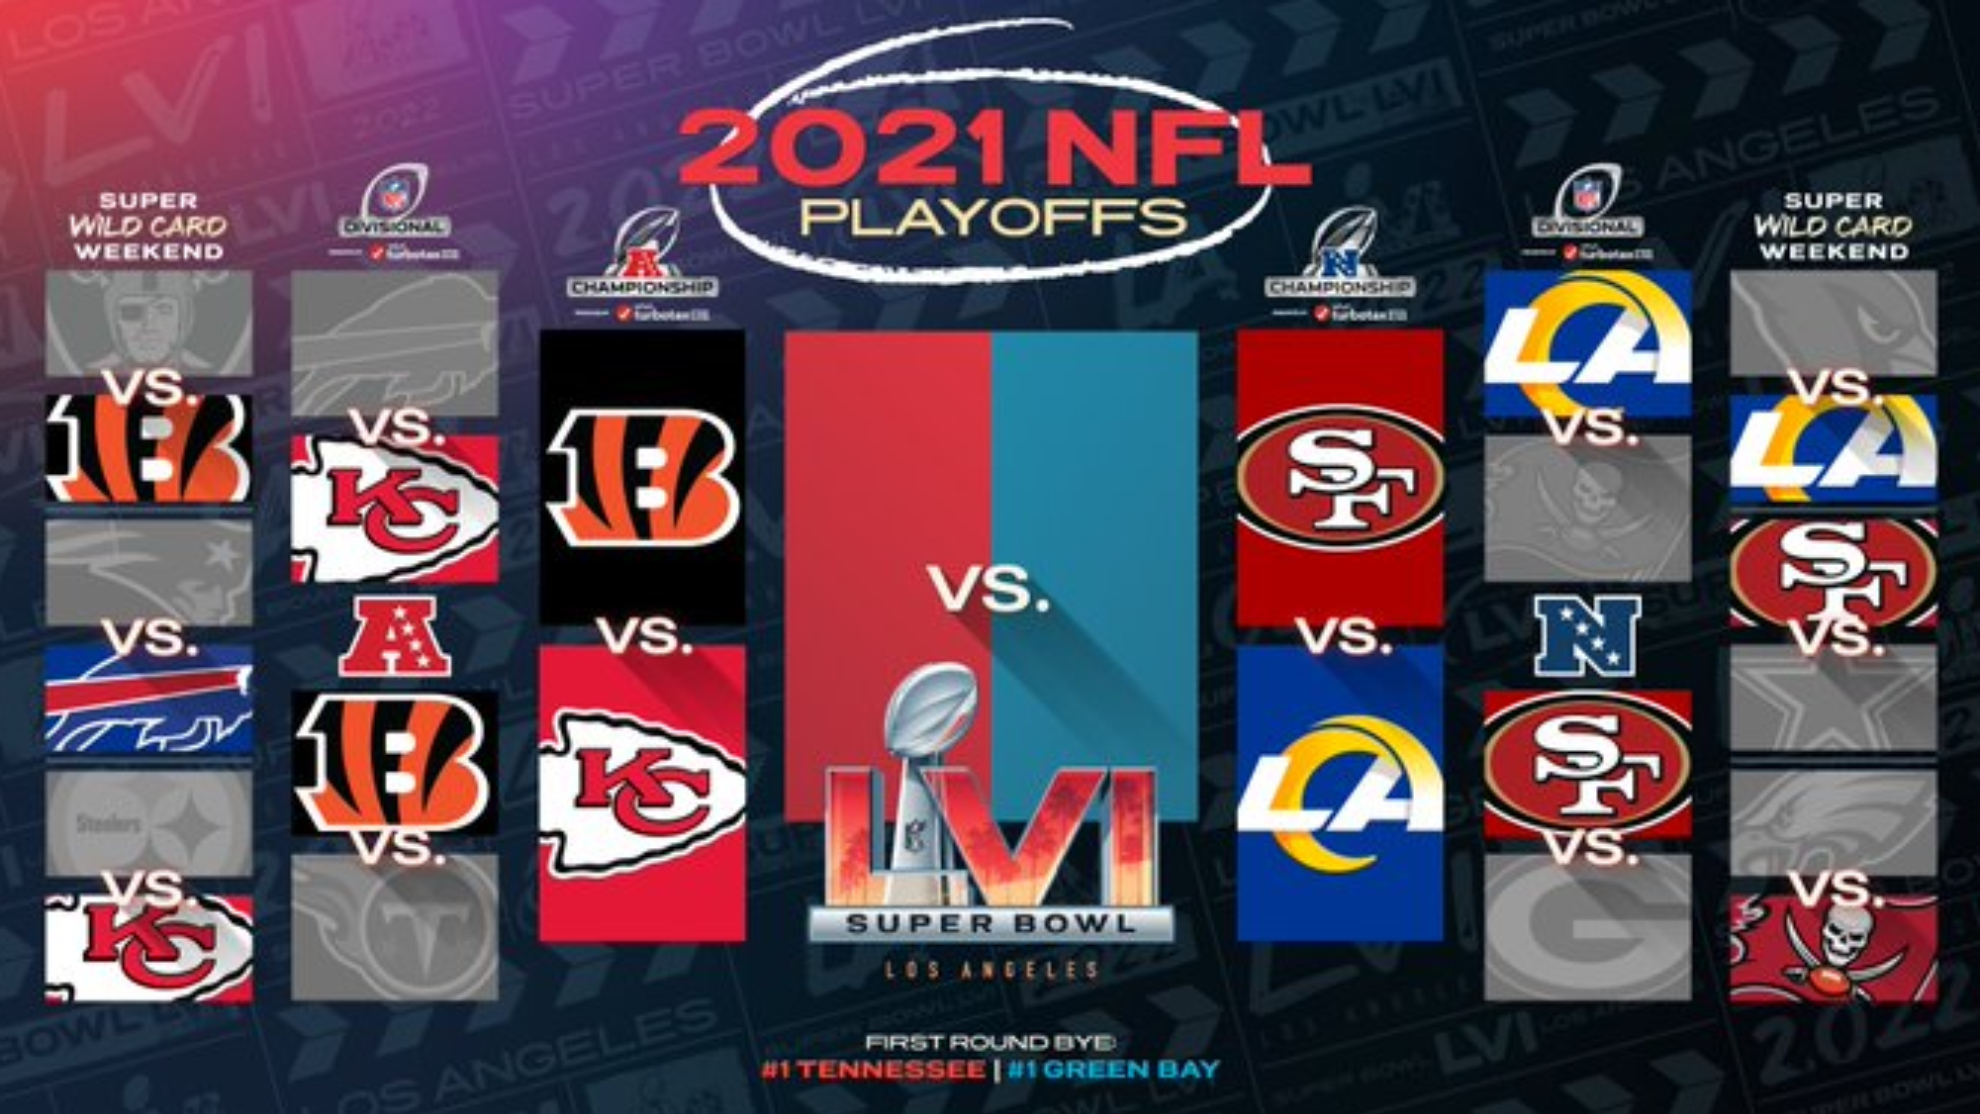 nfl playoff lines 2022